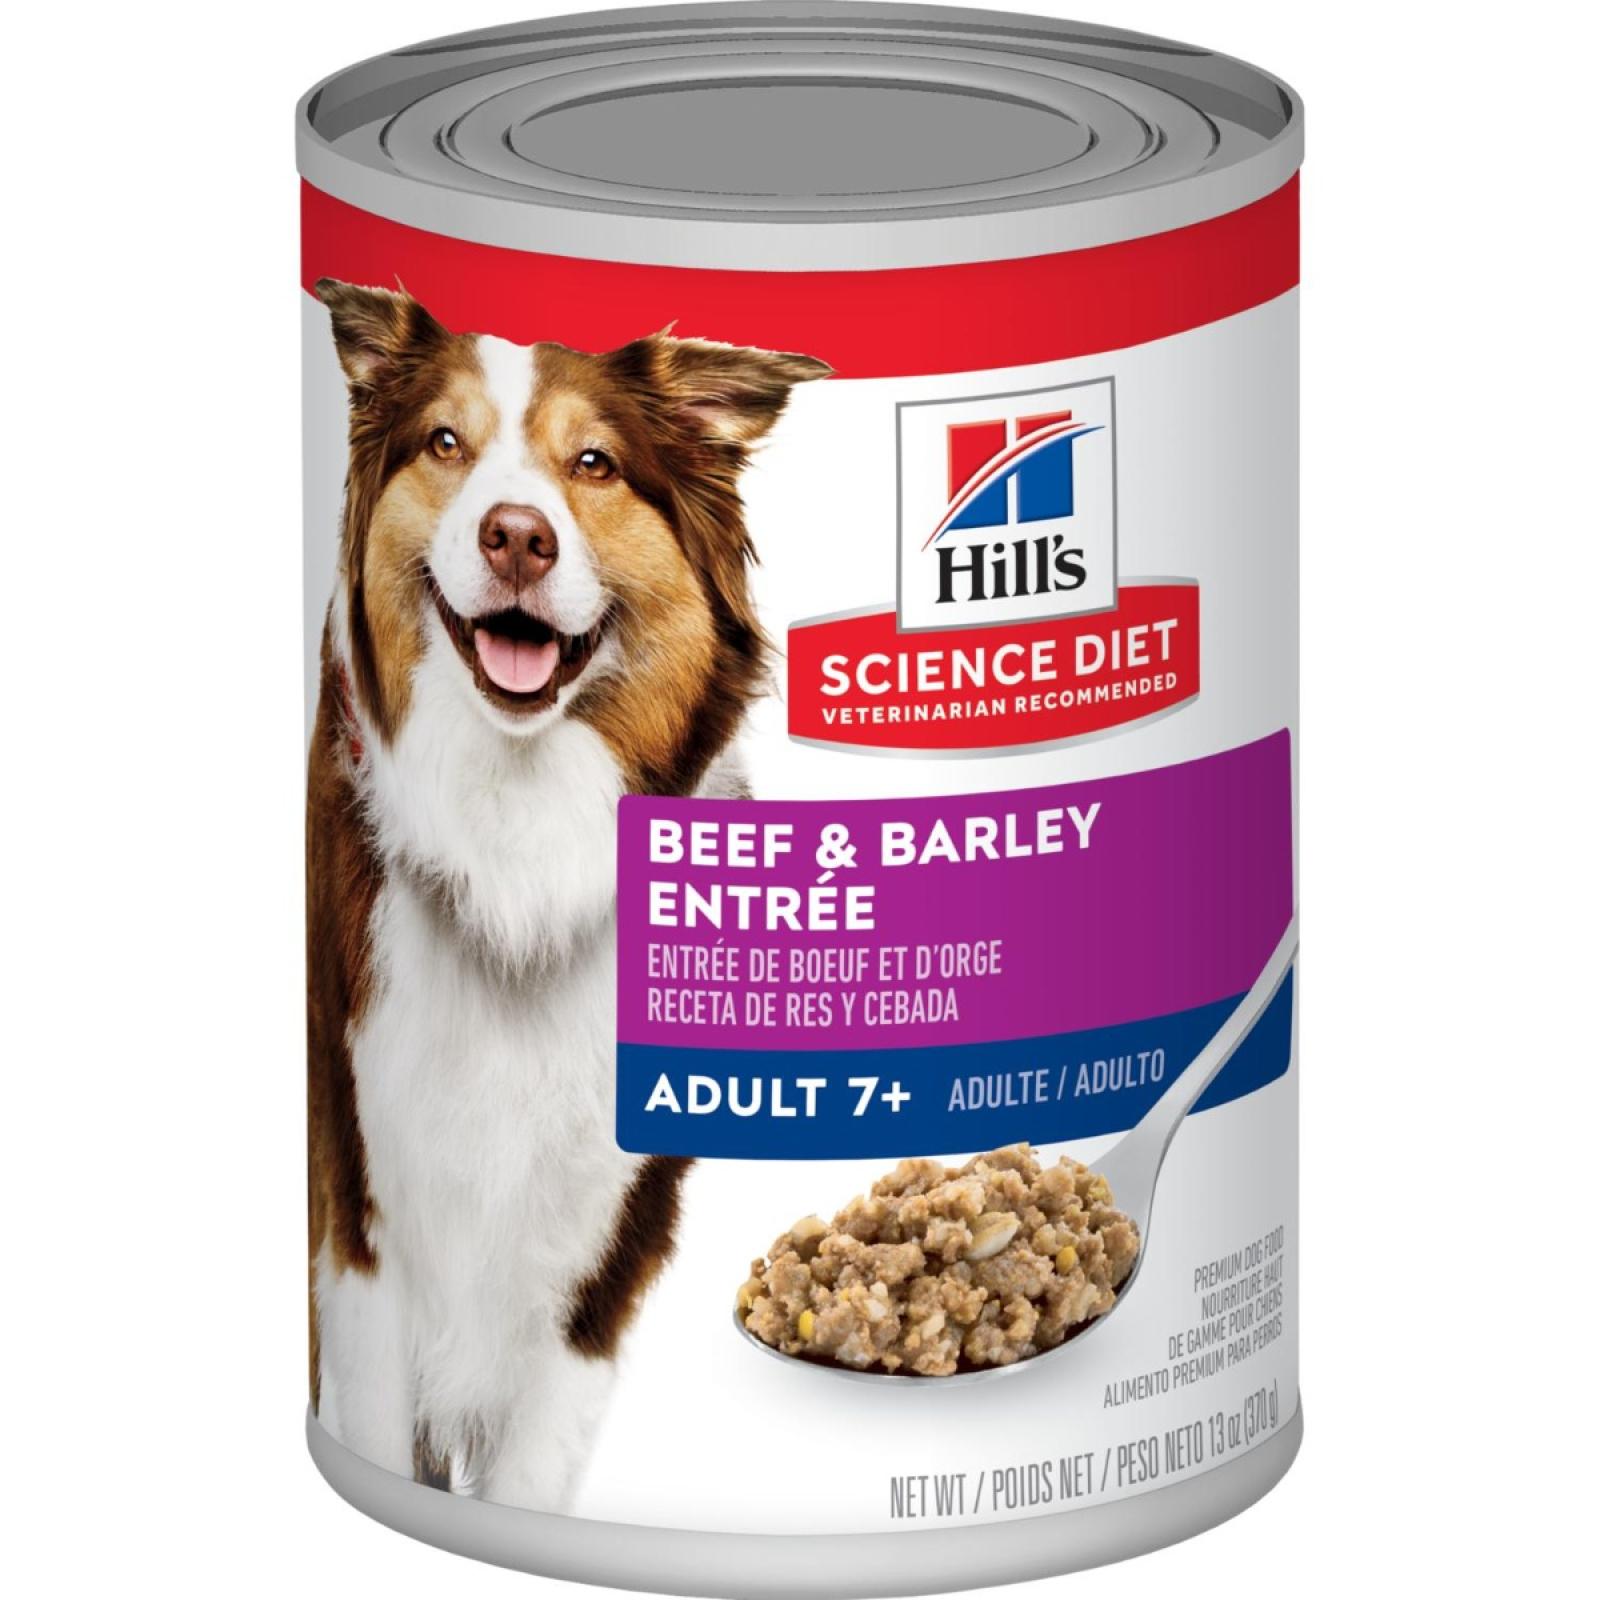 Hill's Science Diet Adult 7+ Beef & Barley Entree